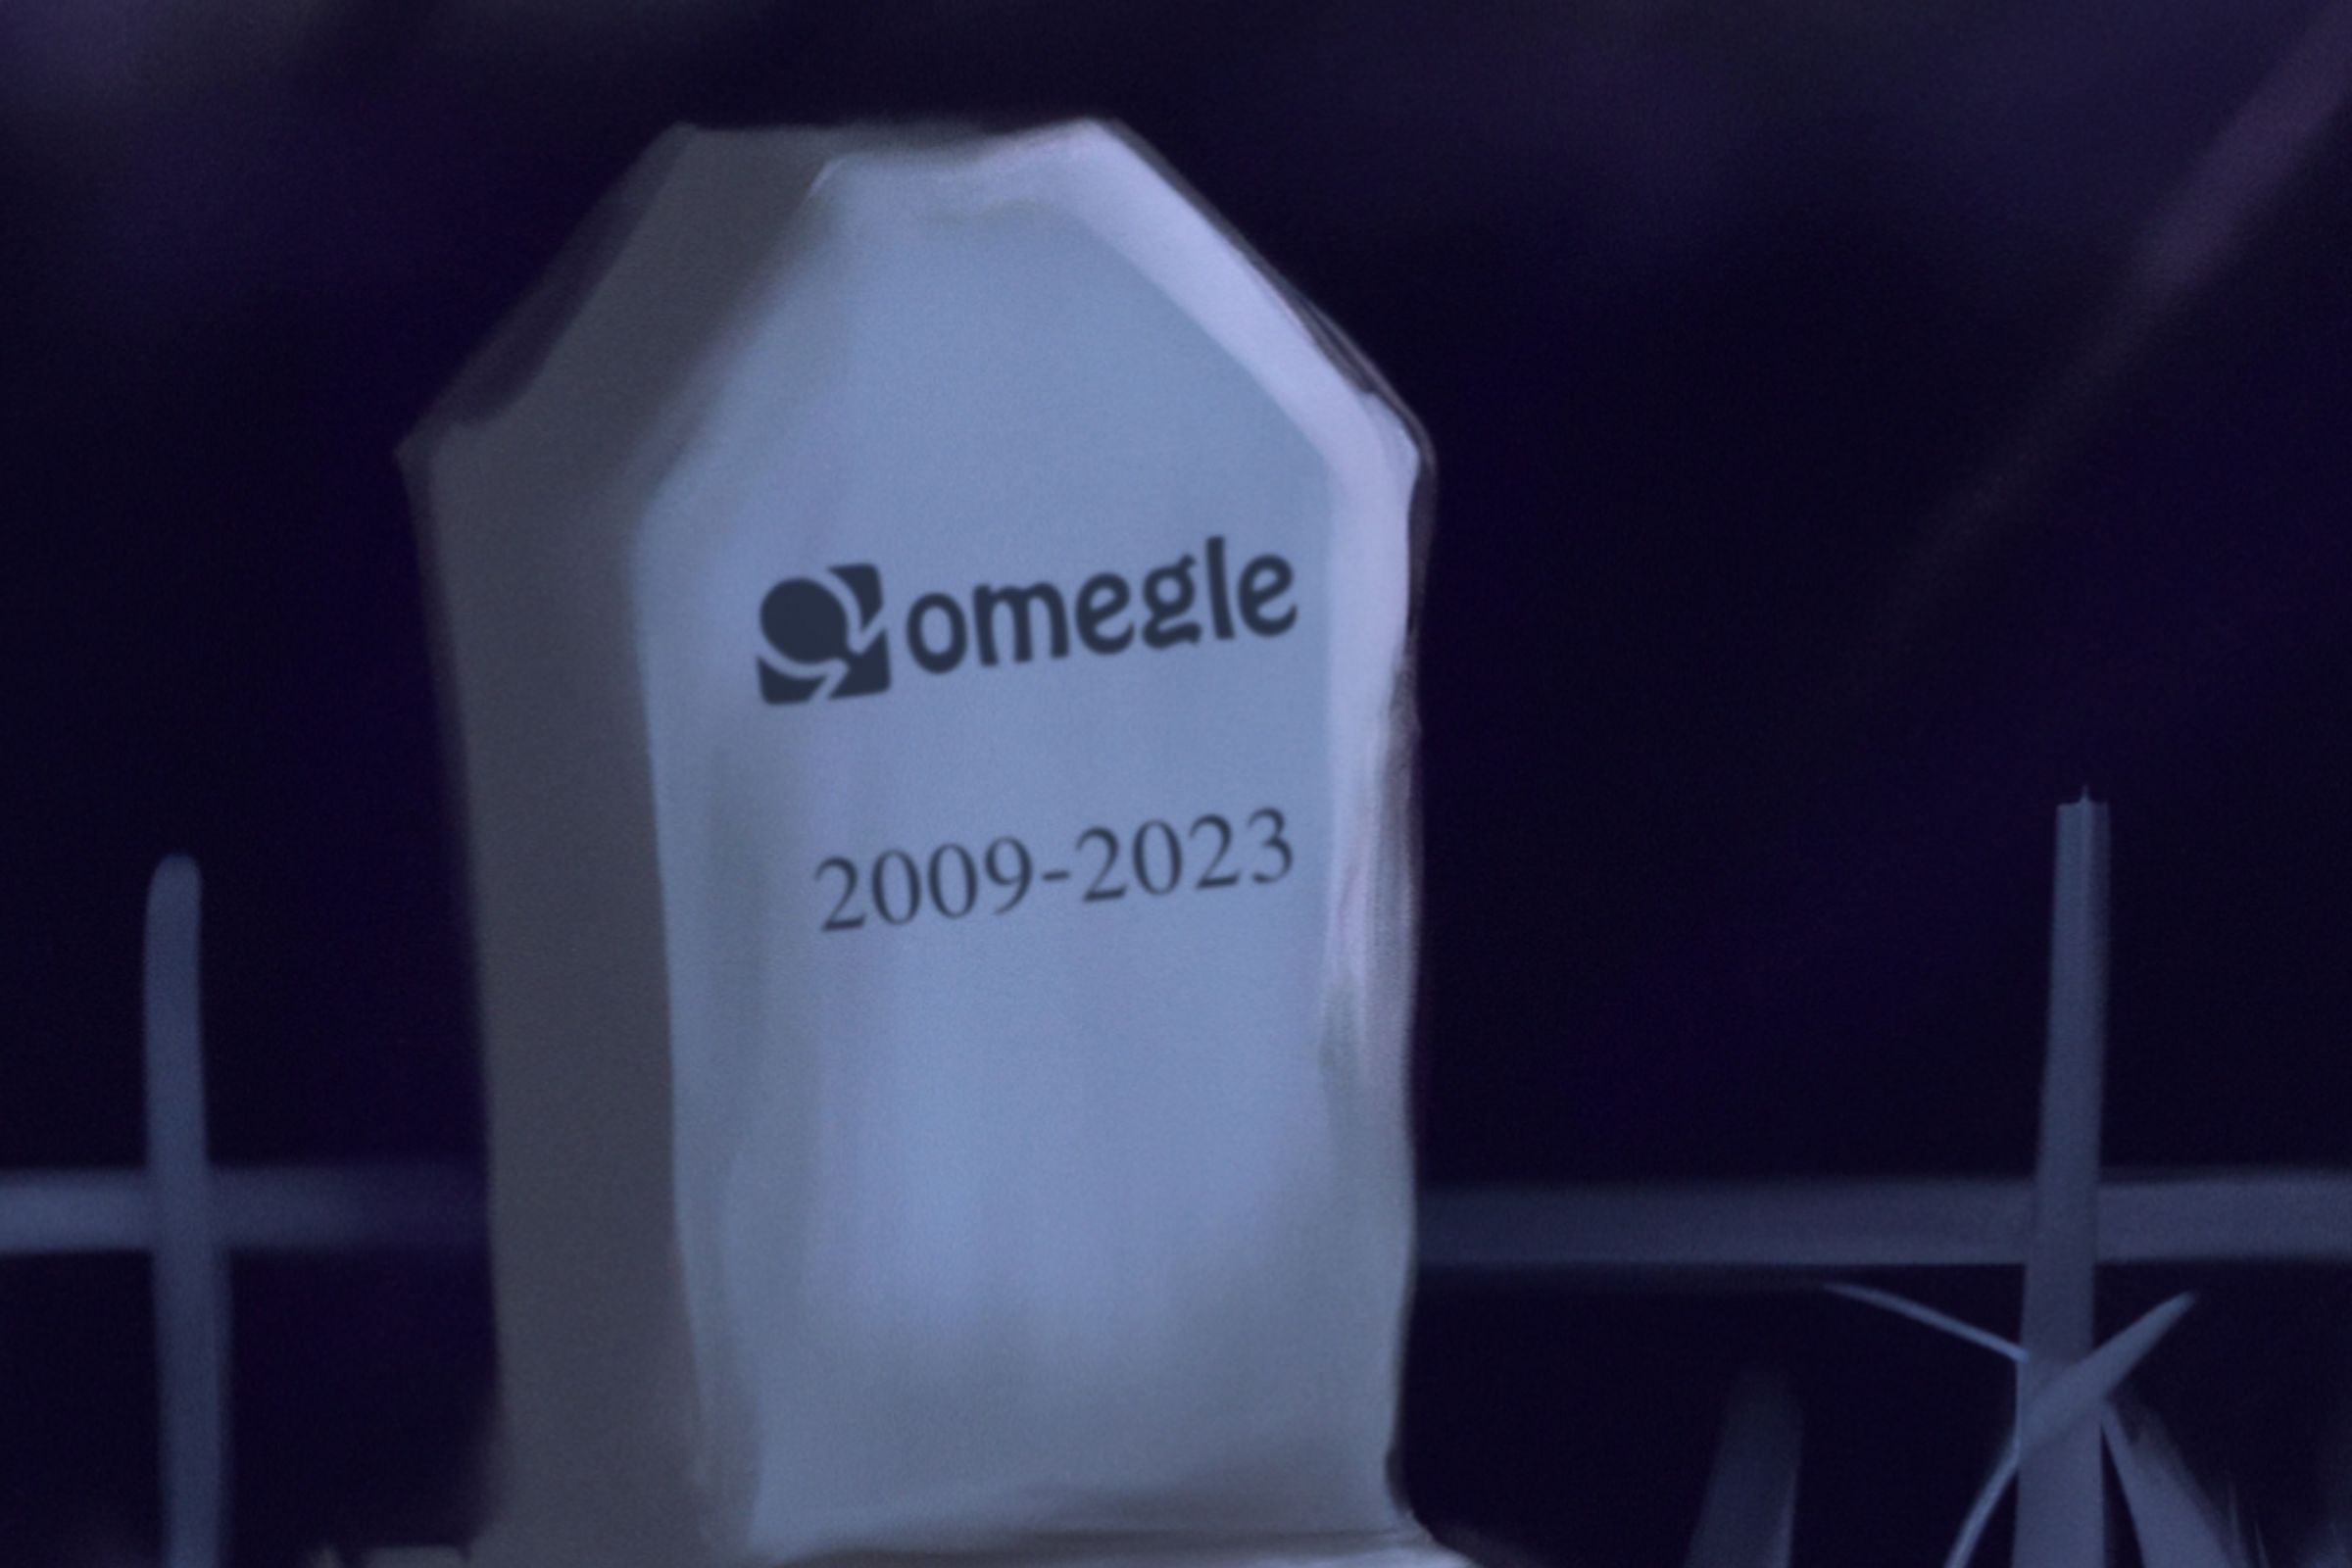 An illustrated gravestone featuring the Omegle logo and a date of 2009 - 2023